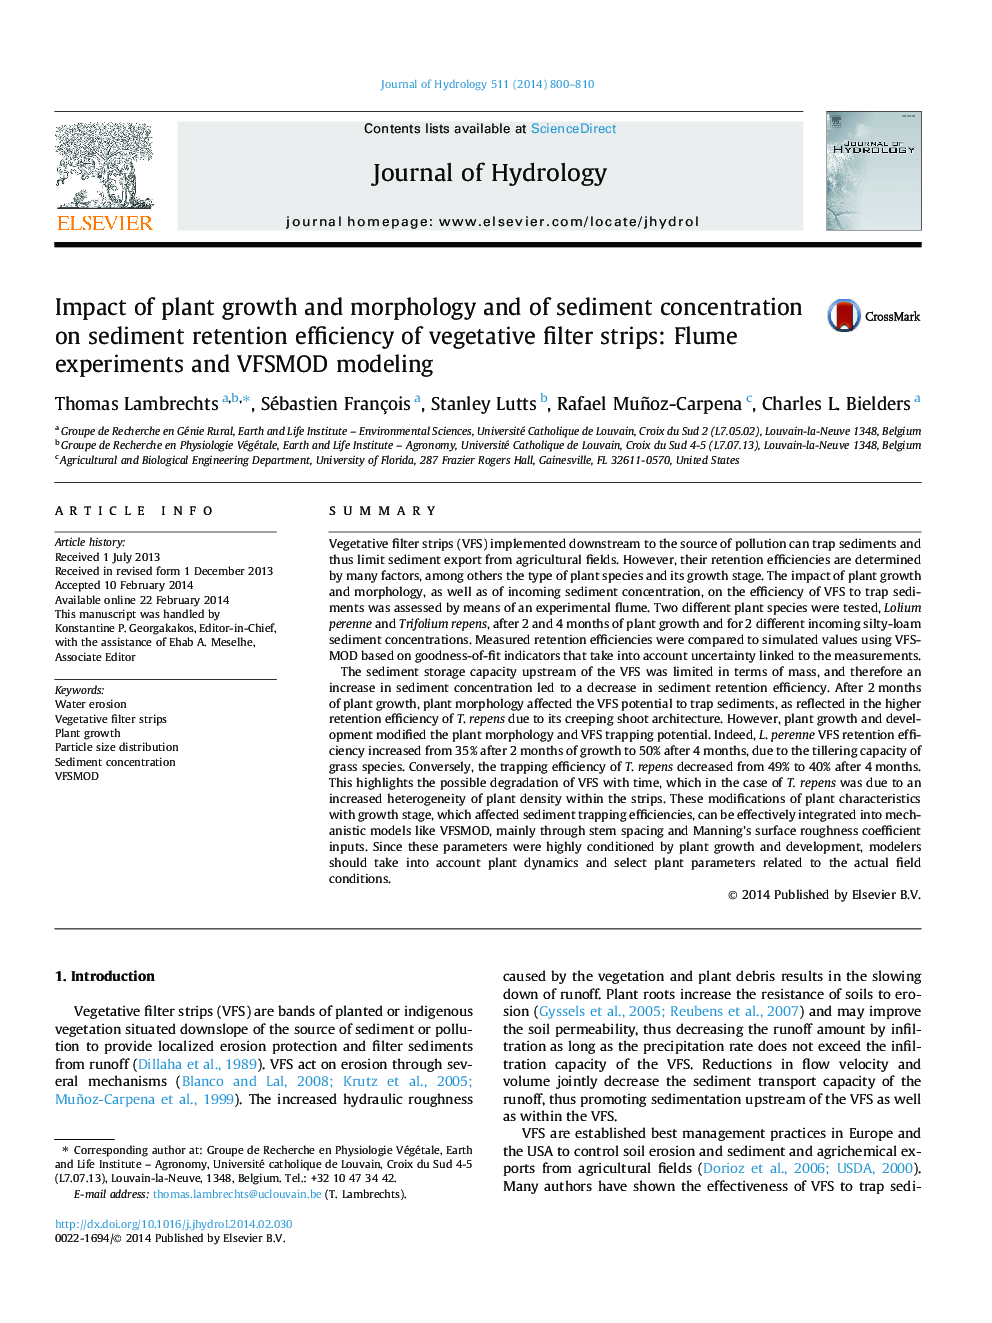 Impact of plant growth and morphology and of sediment concentration on sediment retention efficiency of vegetative filter strips: Flume experiments and VFSMOD modeling